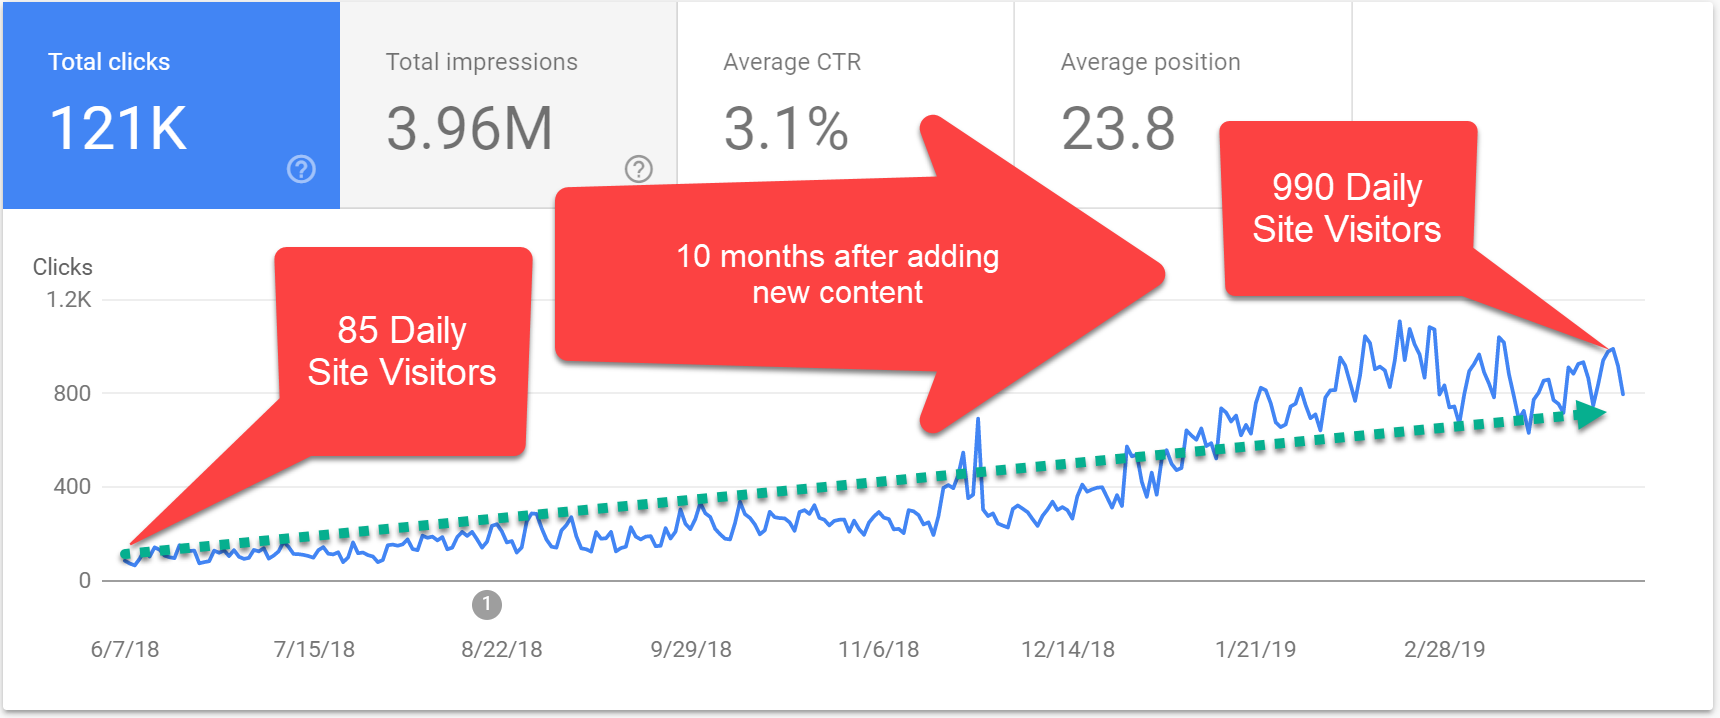 Content marketing case study shows 1100% increase in traffic over 10 months